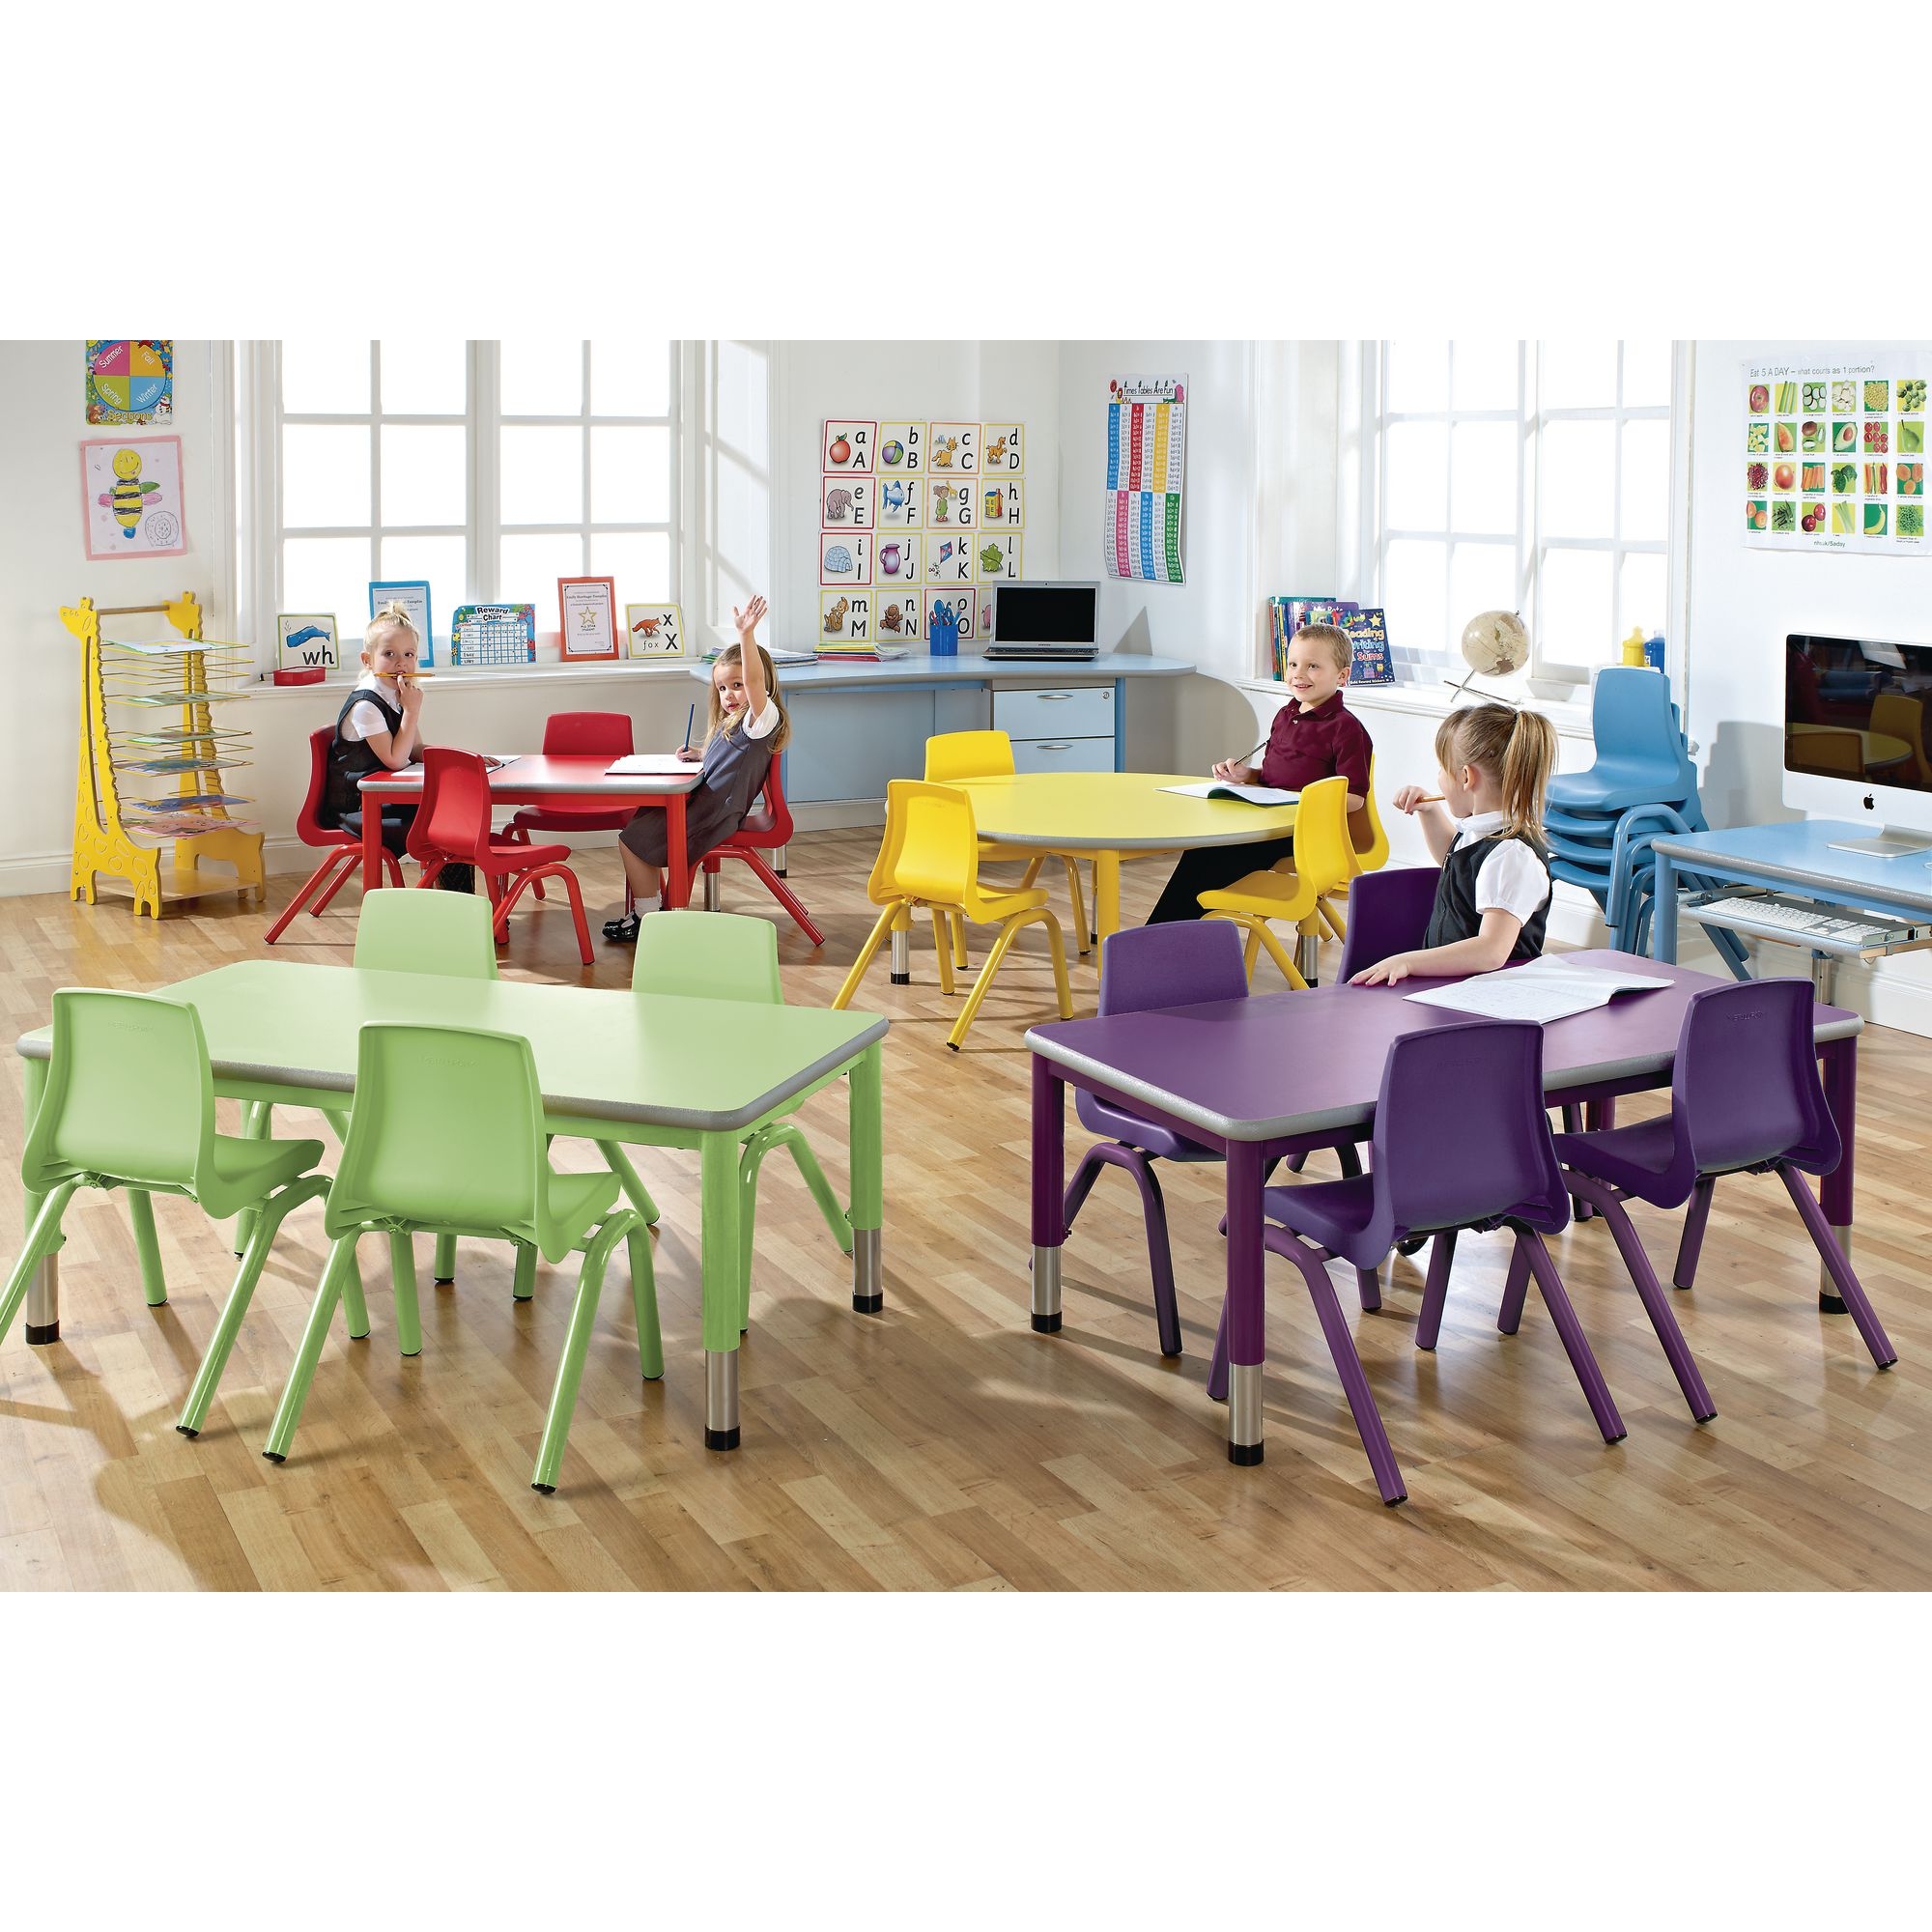 Harlequin Rectangular Height Adjustable Steel Classroom Pack: Table and 4 Chairs - 900 x 600 x 460mm - Yellow